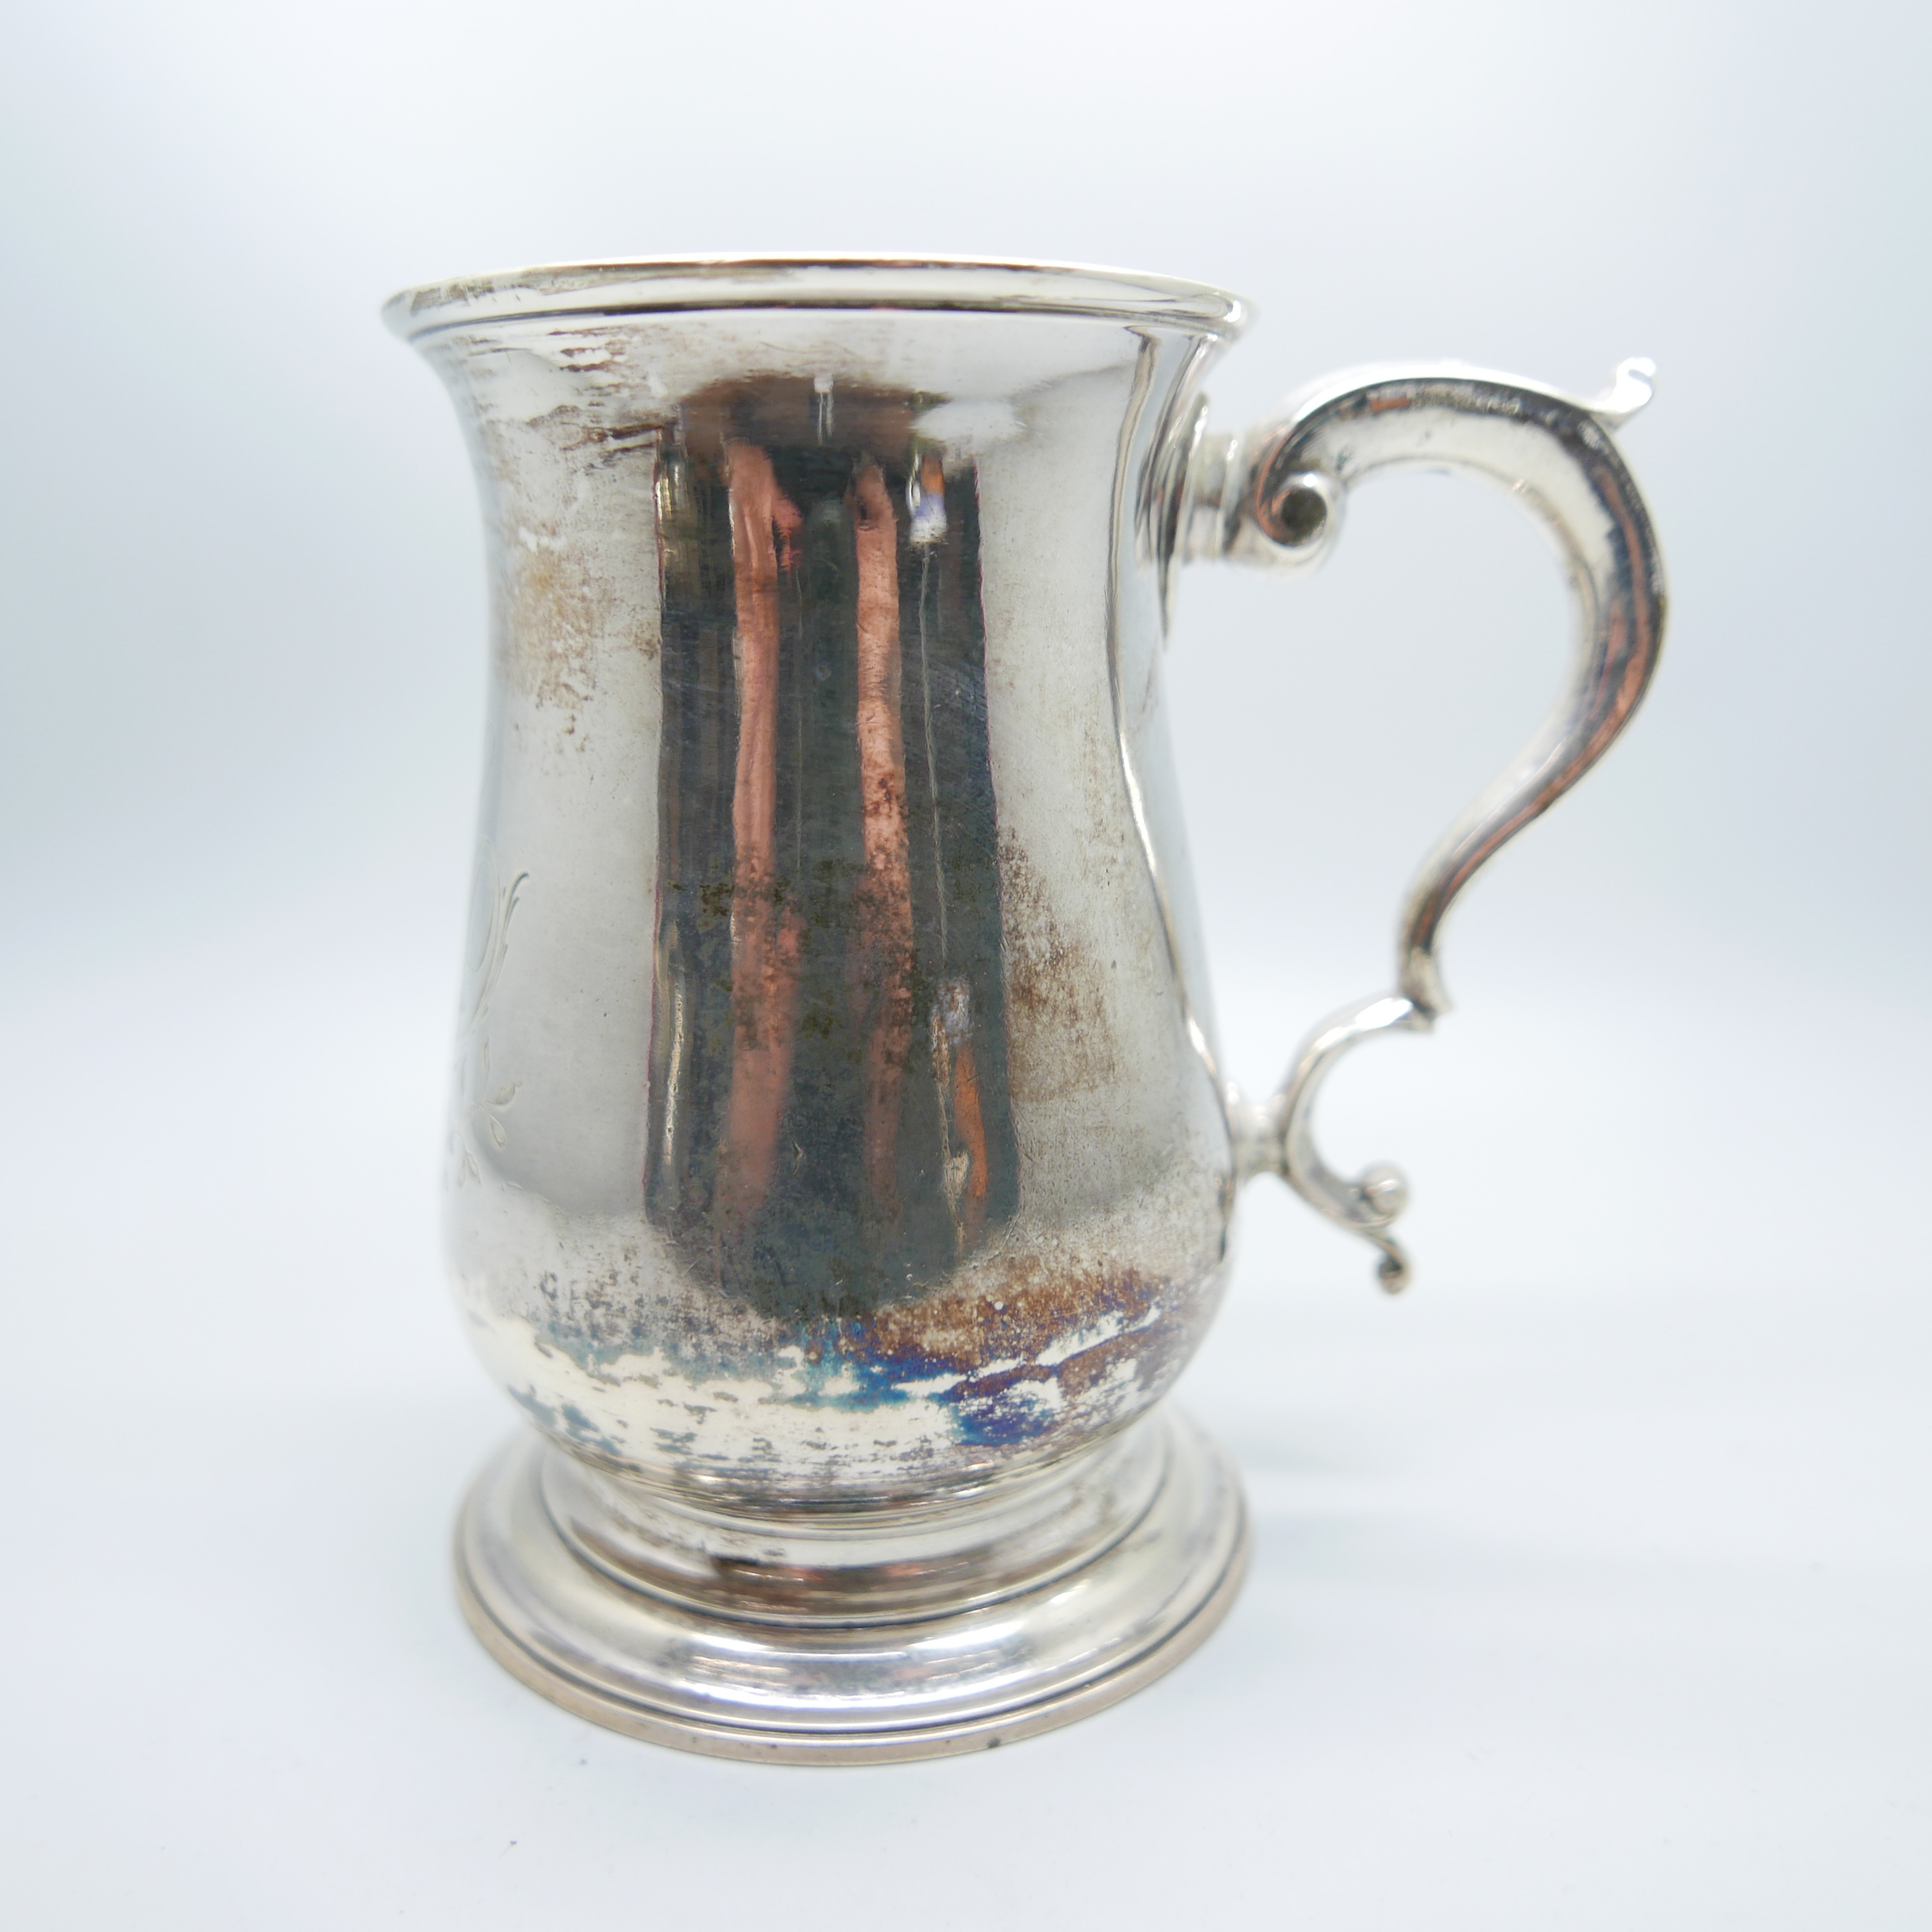 A George III silver tankard, London 1767, by William and James Priest with later engraving, double